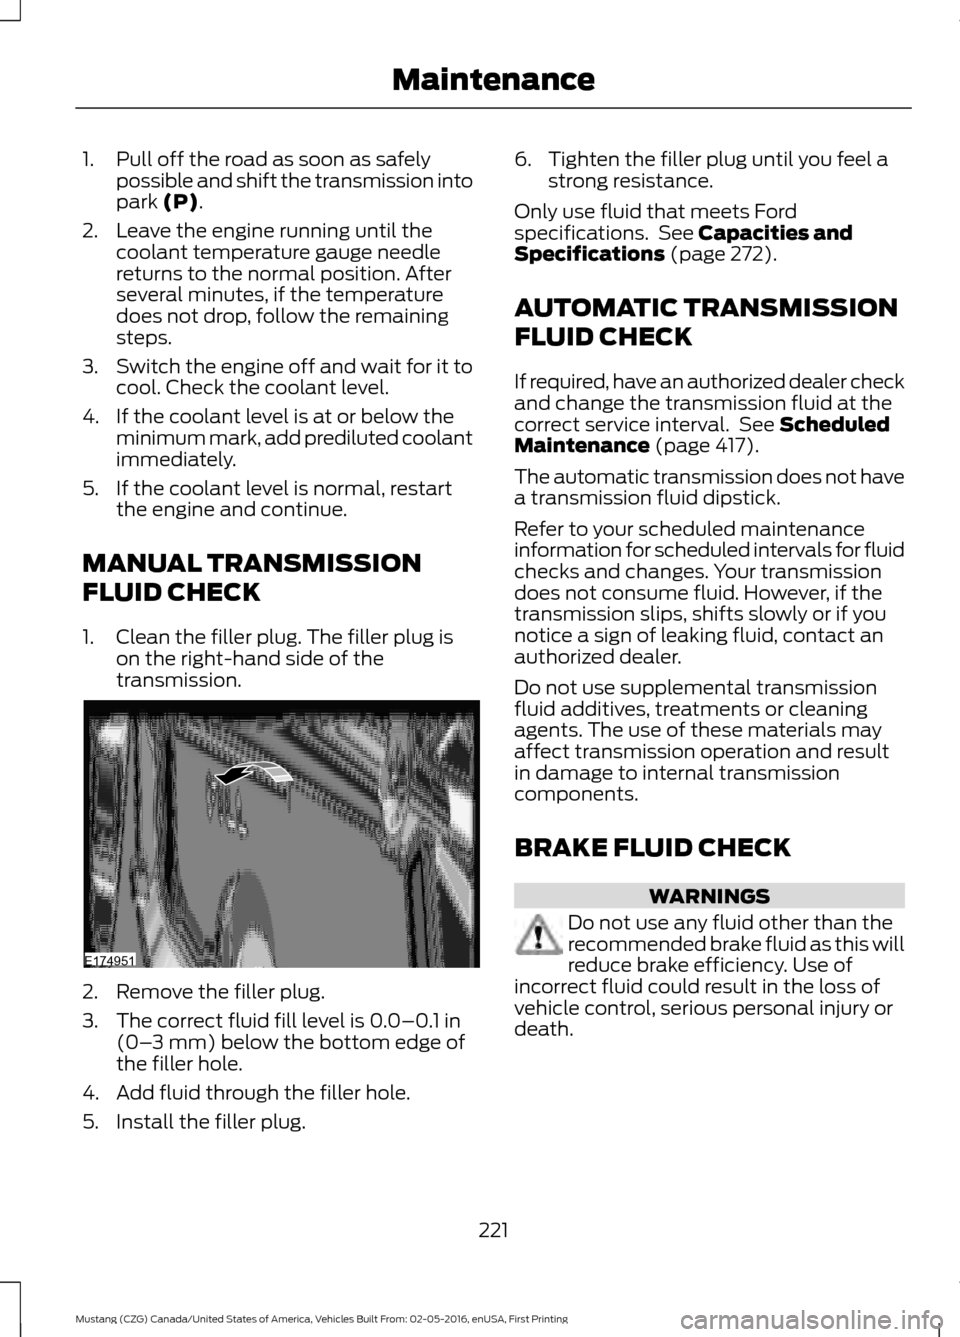 FORD MUSTANG 2017 6.G Service Manual 1. Pull off the road as soon as safely
possible and shift the transmission into
park (P).
2. Leave the engine running until the coolant temperature gauge needle
returns to the normal position. After
s